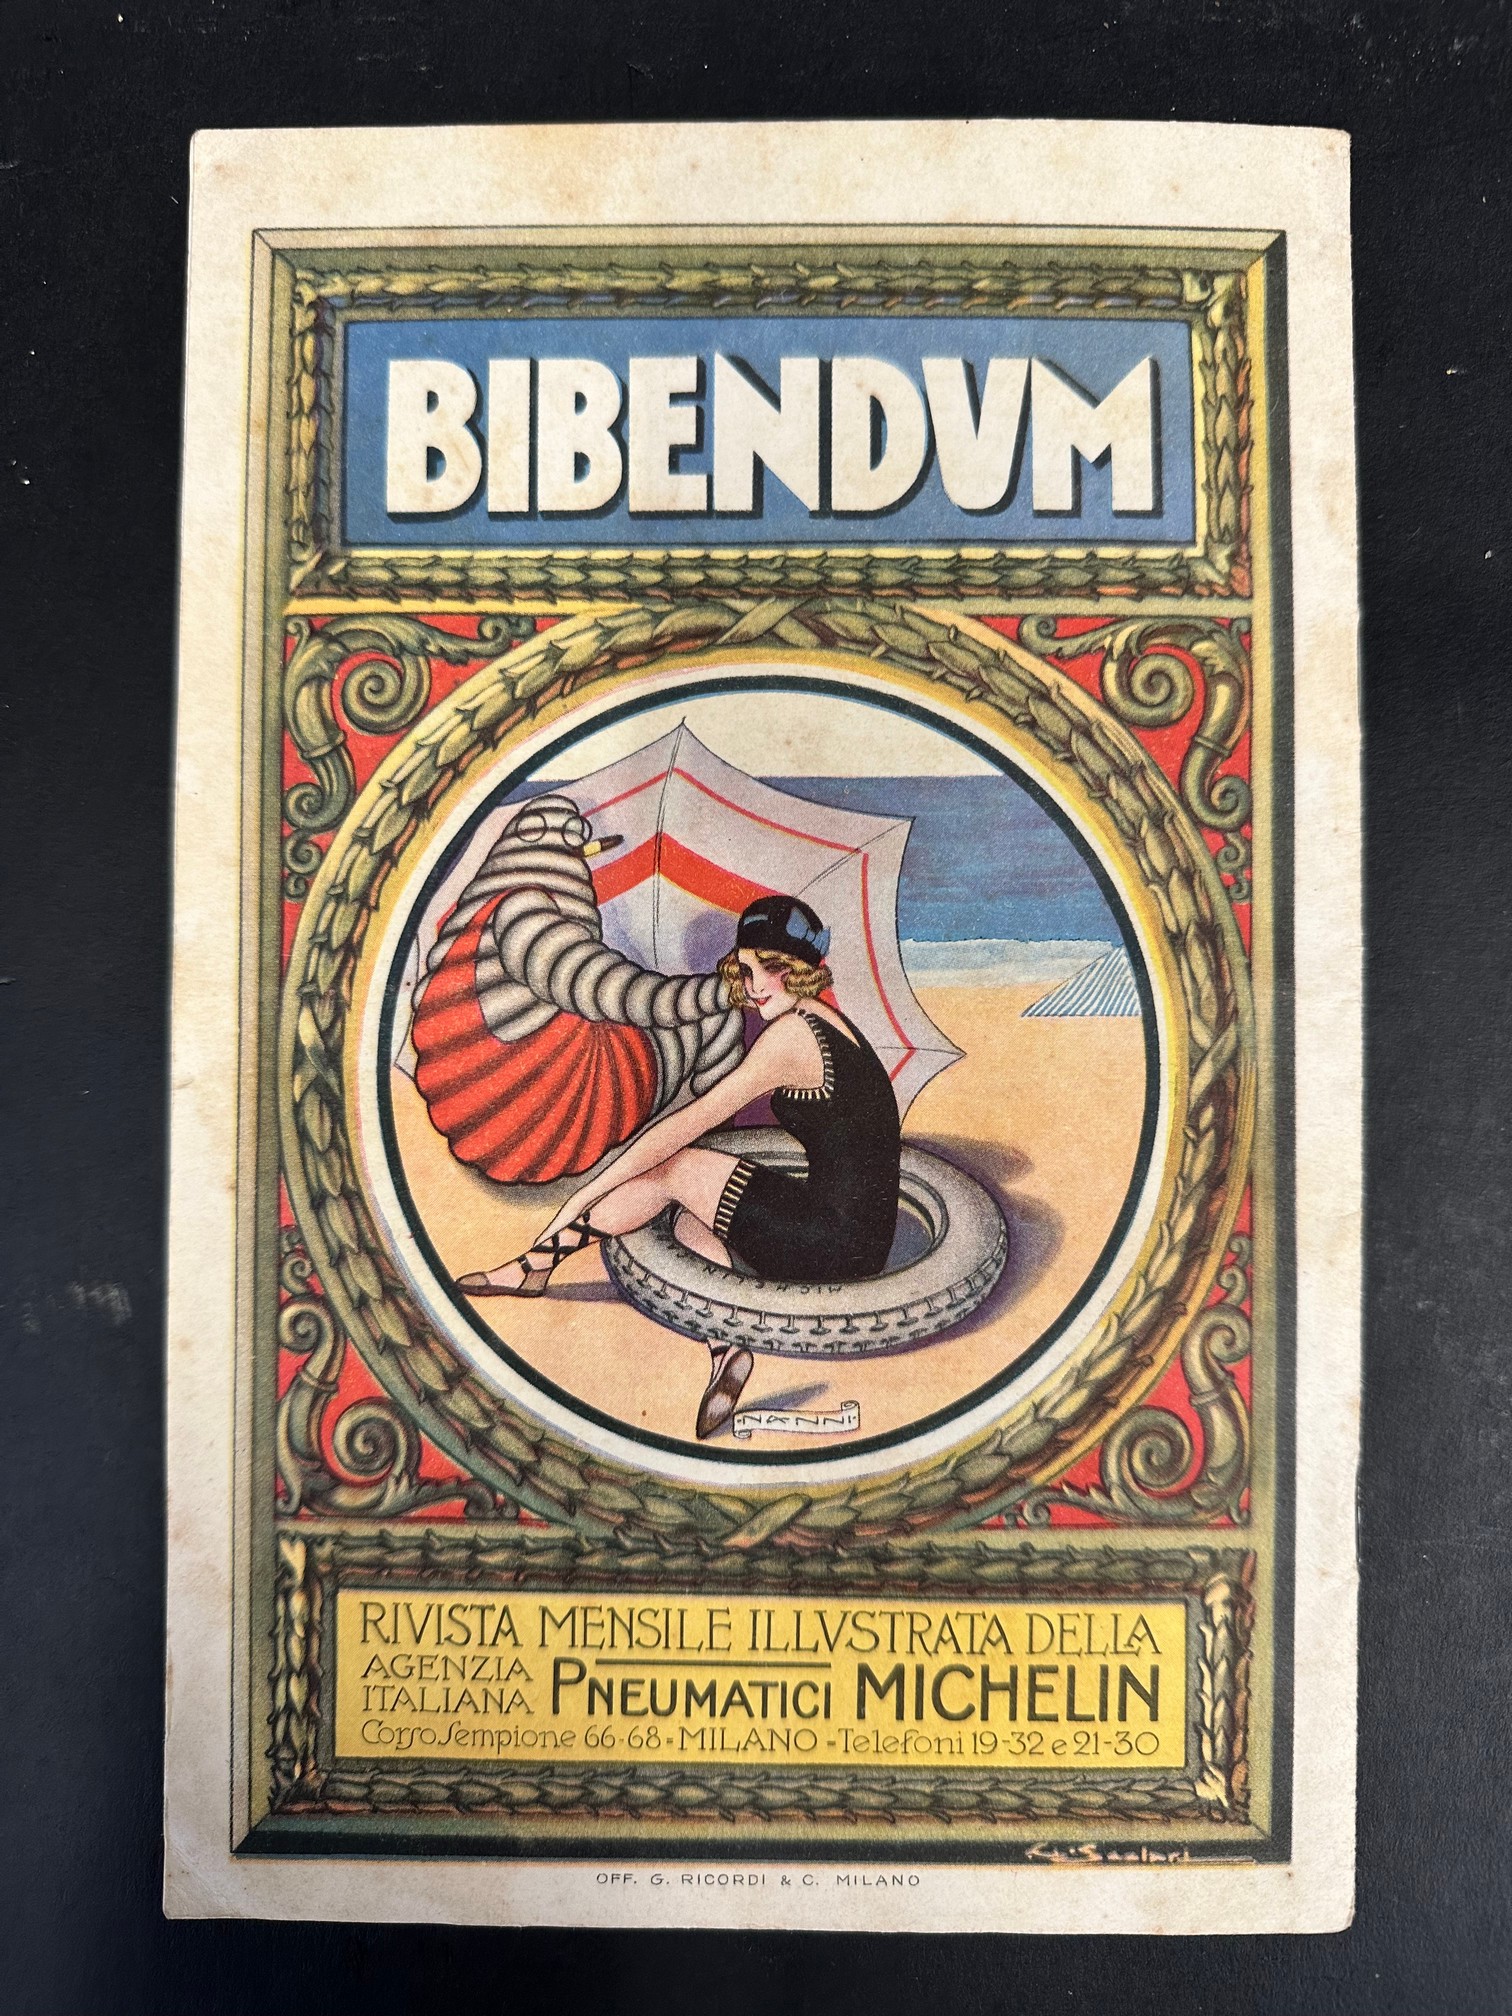 A rare Michelin publication titled 'Bibendum', dated 1922, beautifully illustrated throughout. - Image 10 of 10